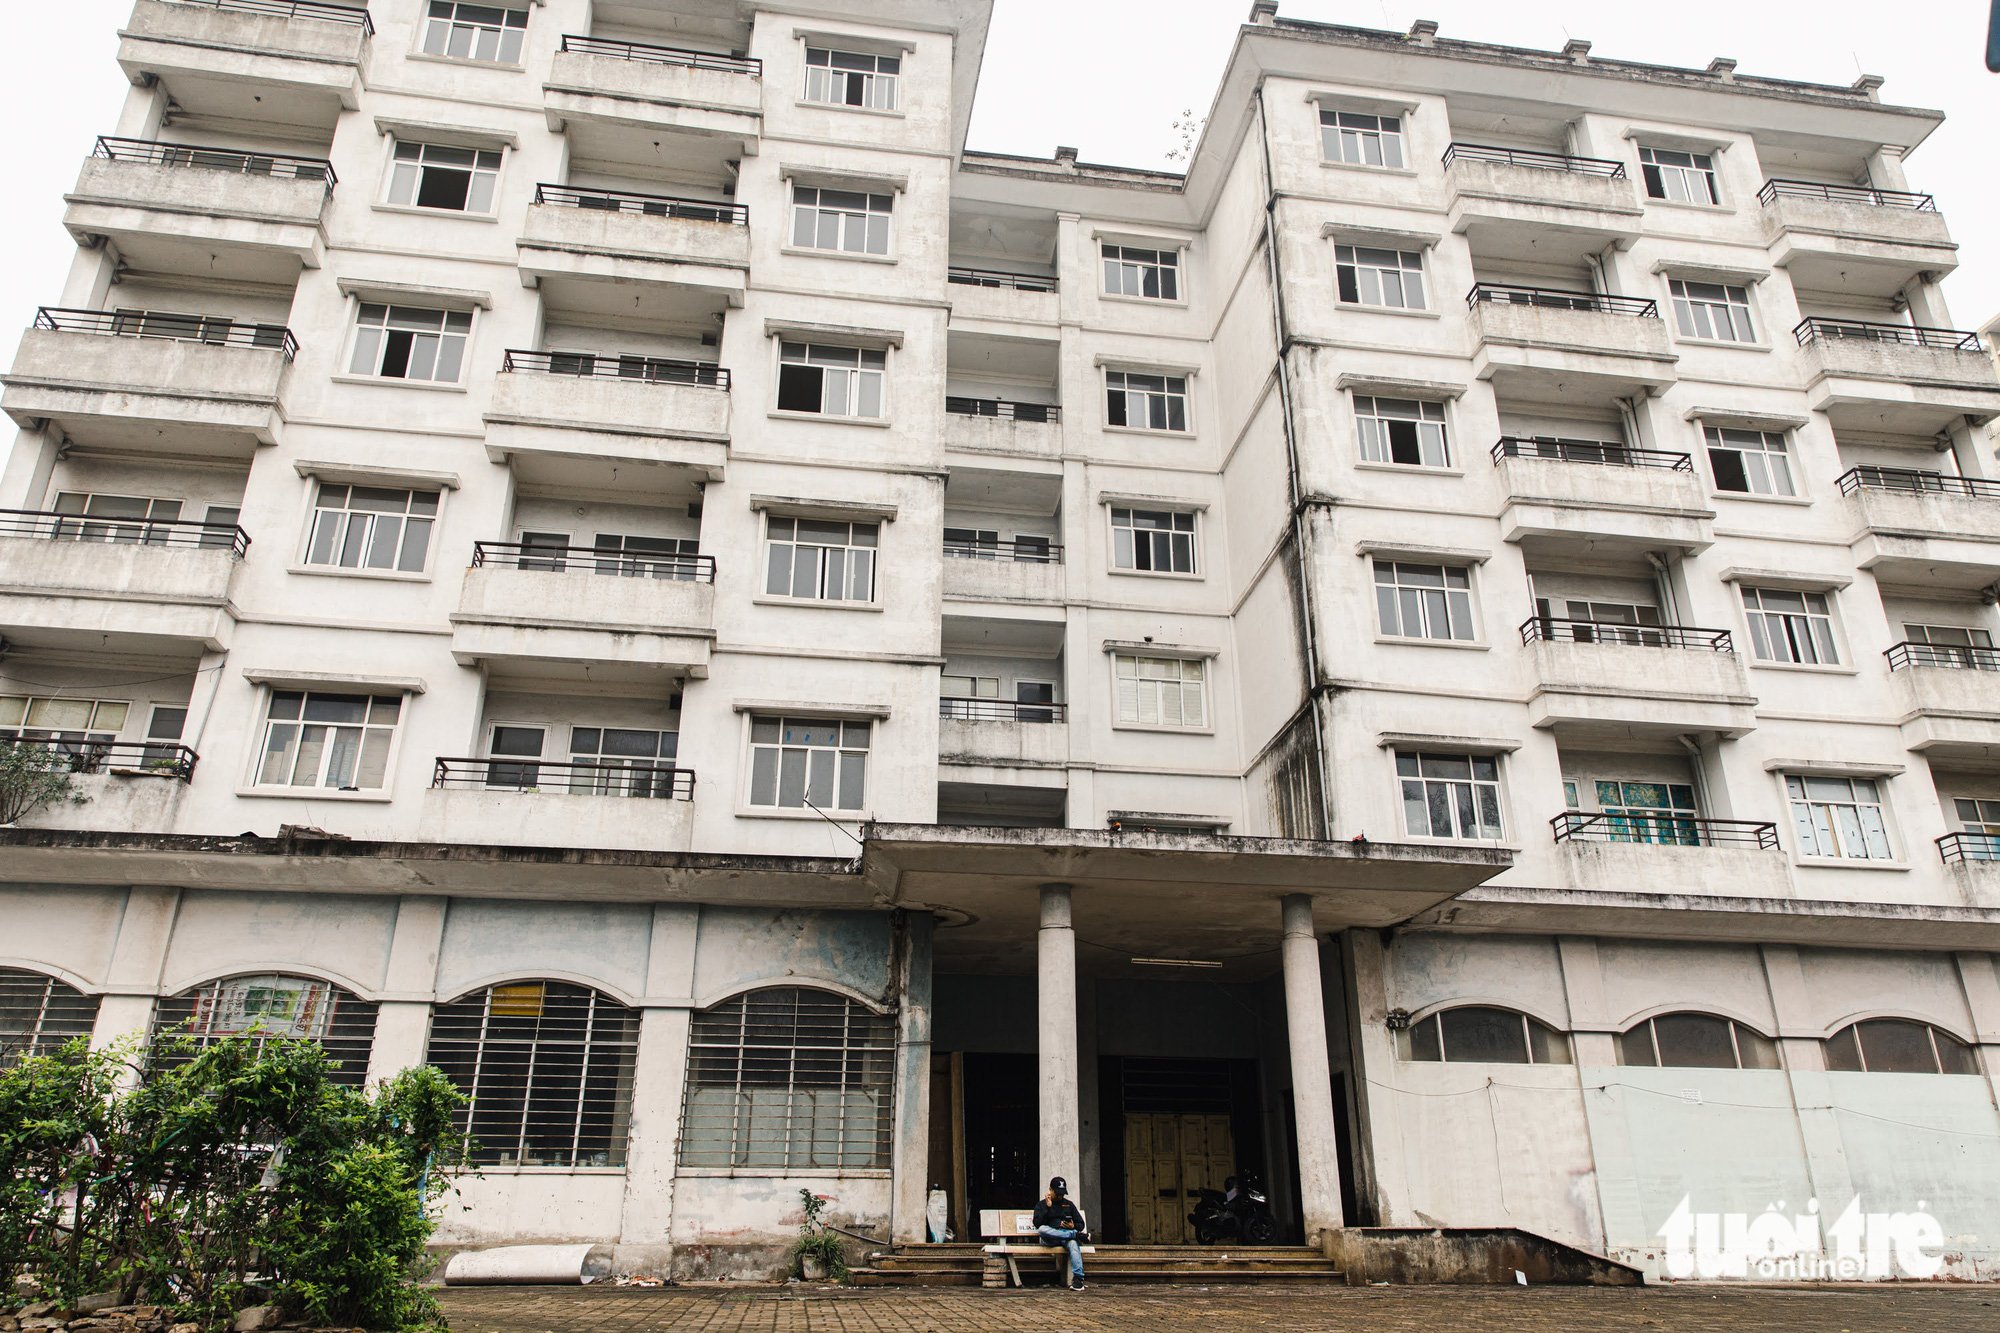 At the N3-N4-N5 project in Long Bien District, Hanoi, its three blocks with over 150 resettlement apartments were built already but remained uninhabited for a long time. Photo: Tuoi Tre